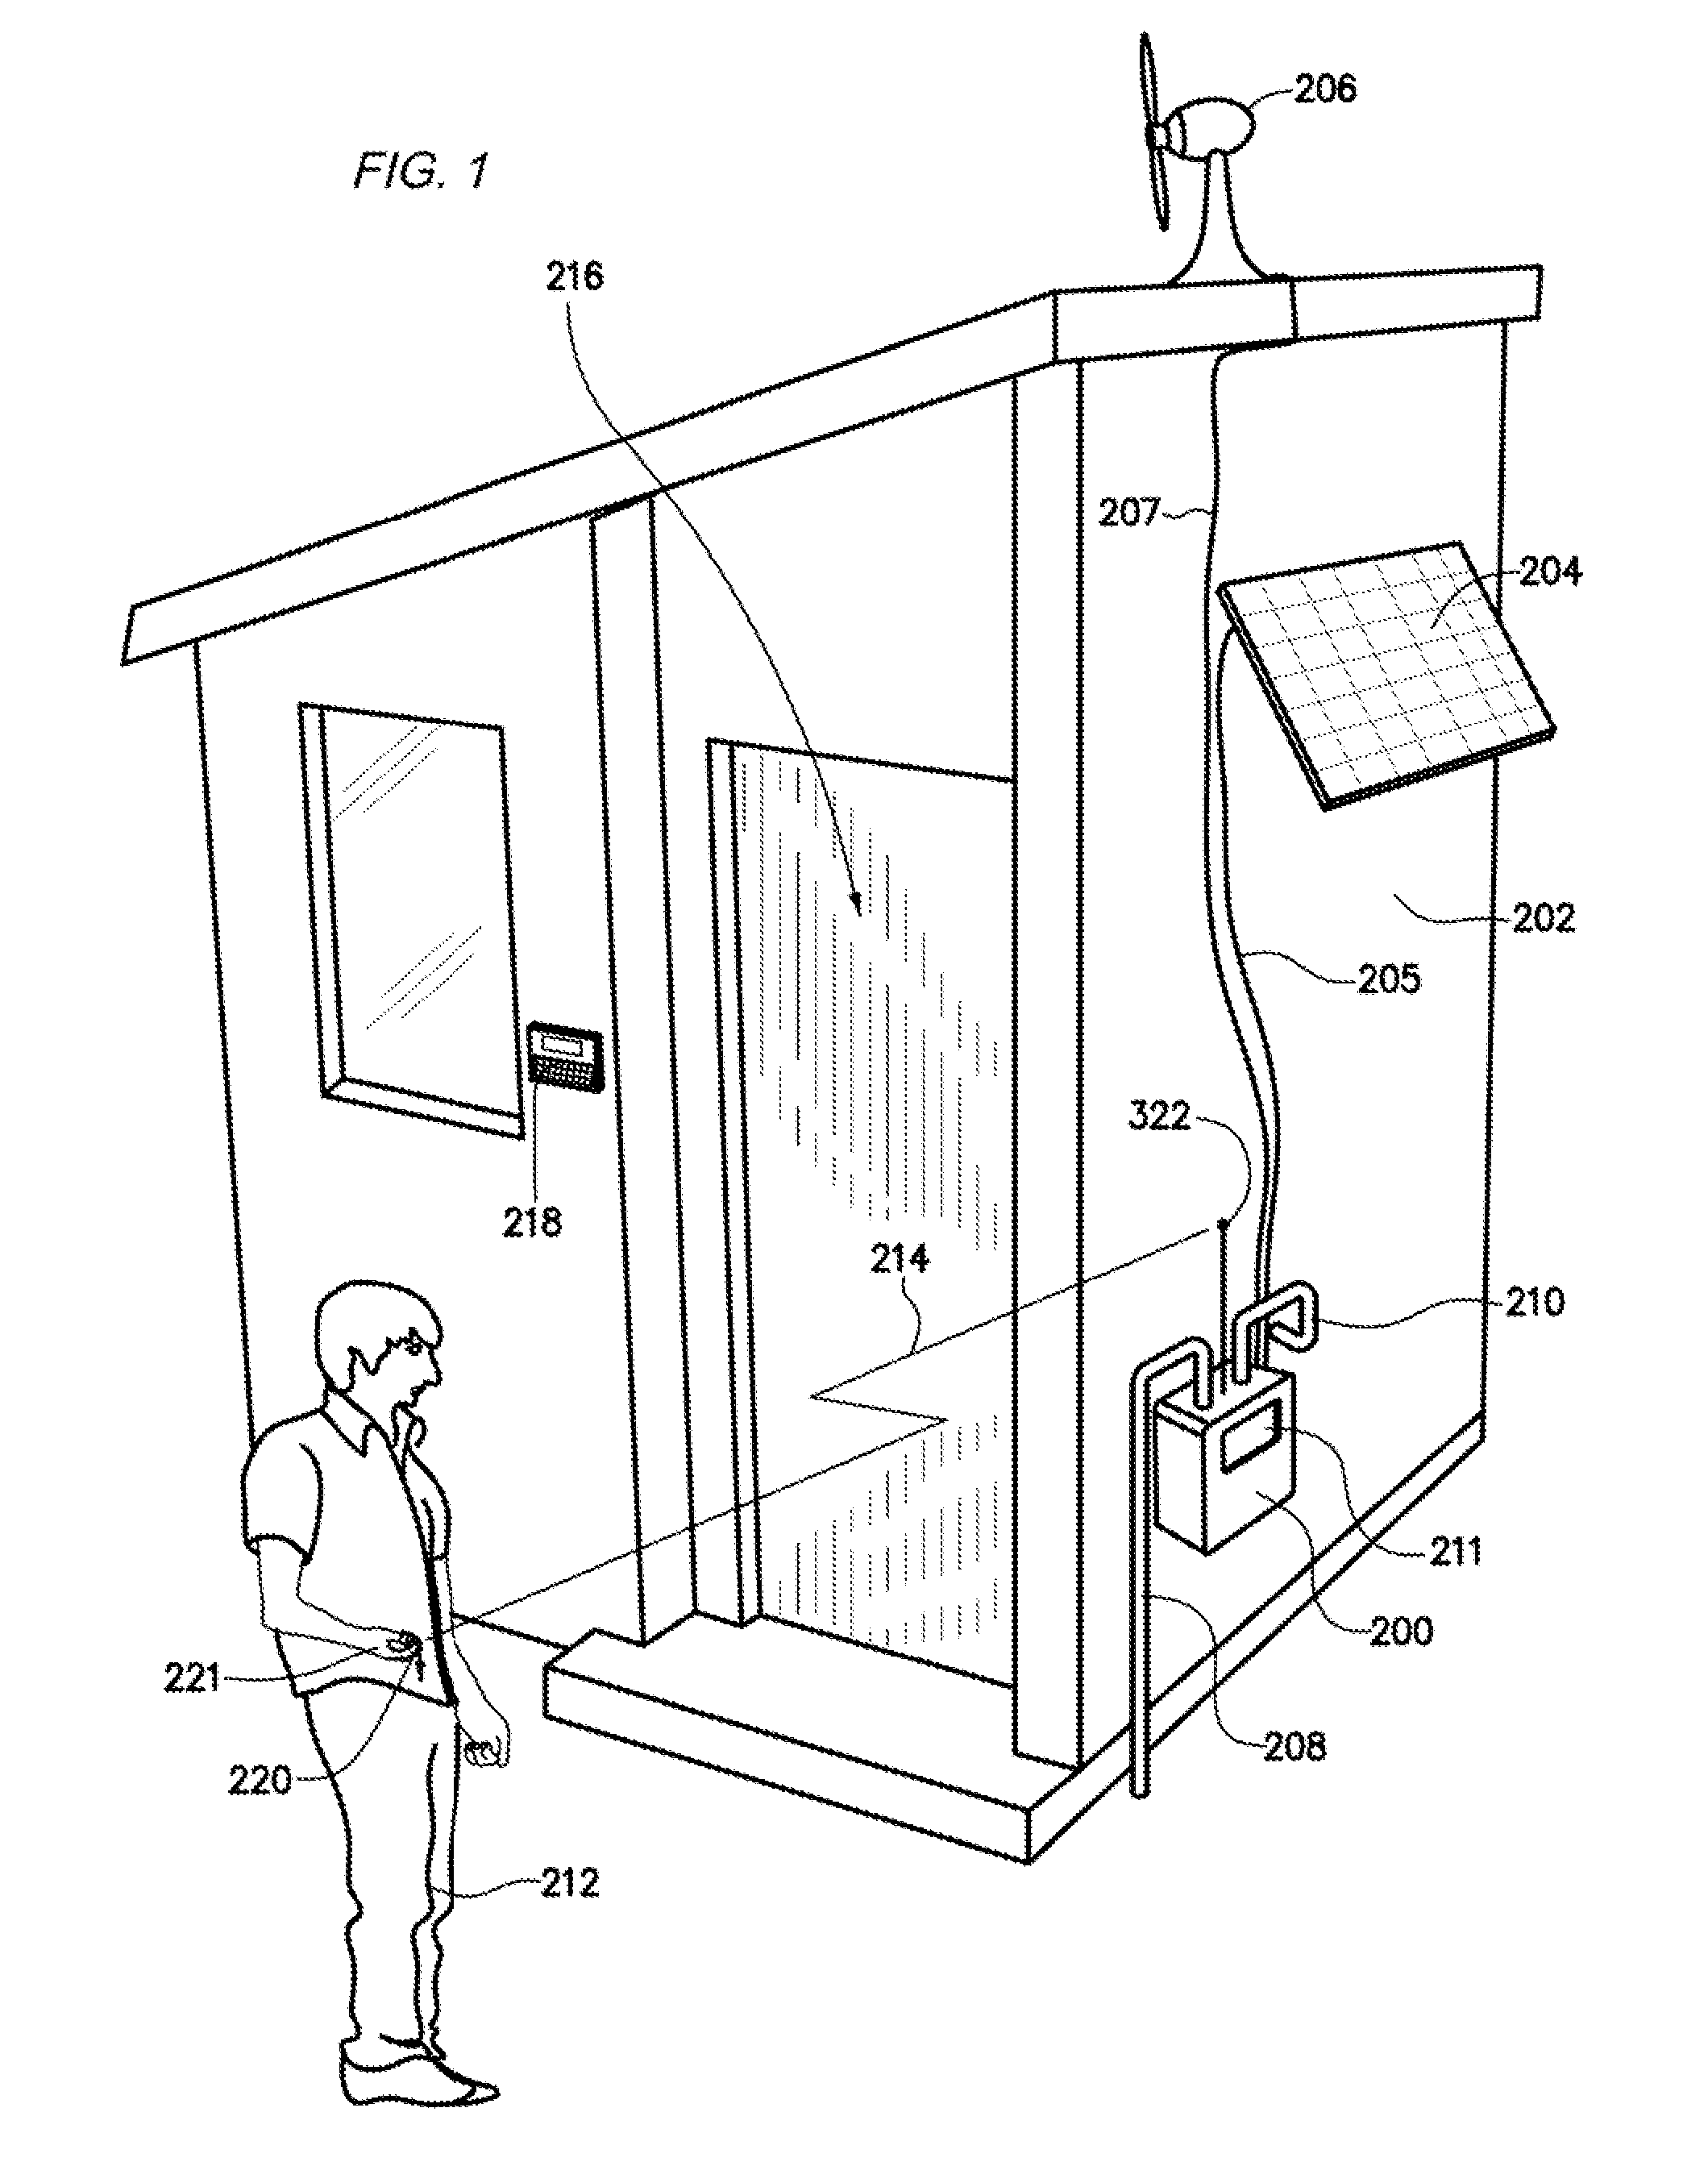 Water use monitoring apparatus and water damage prevention system